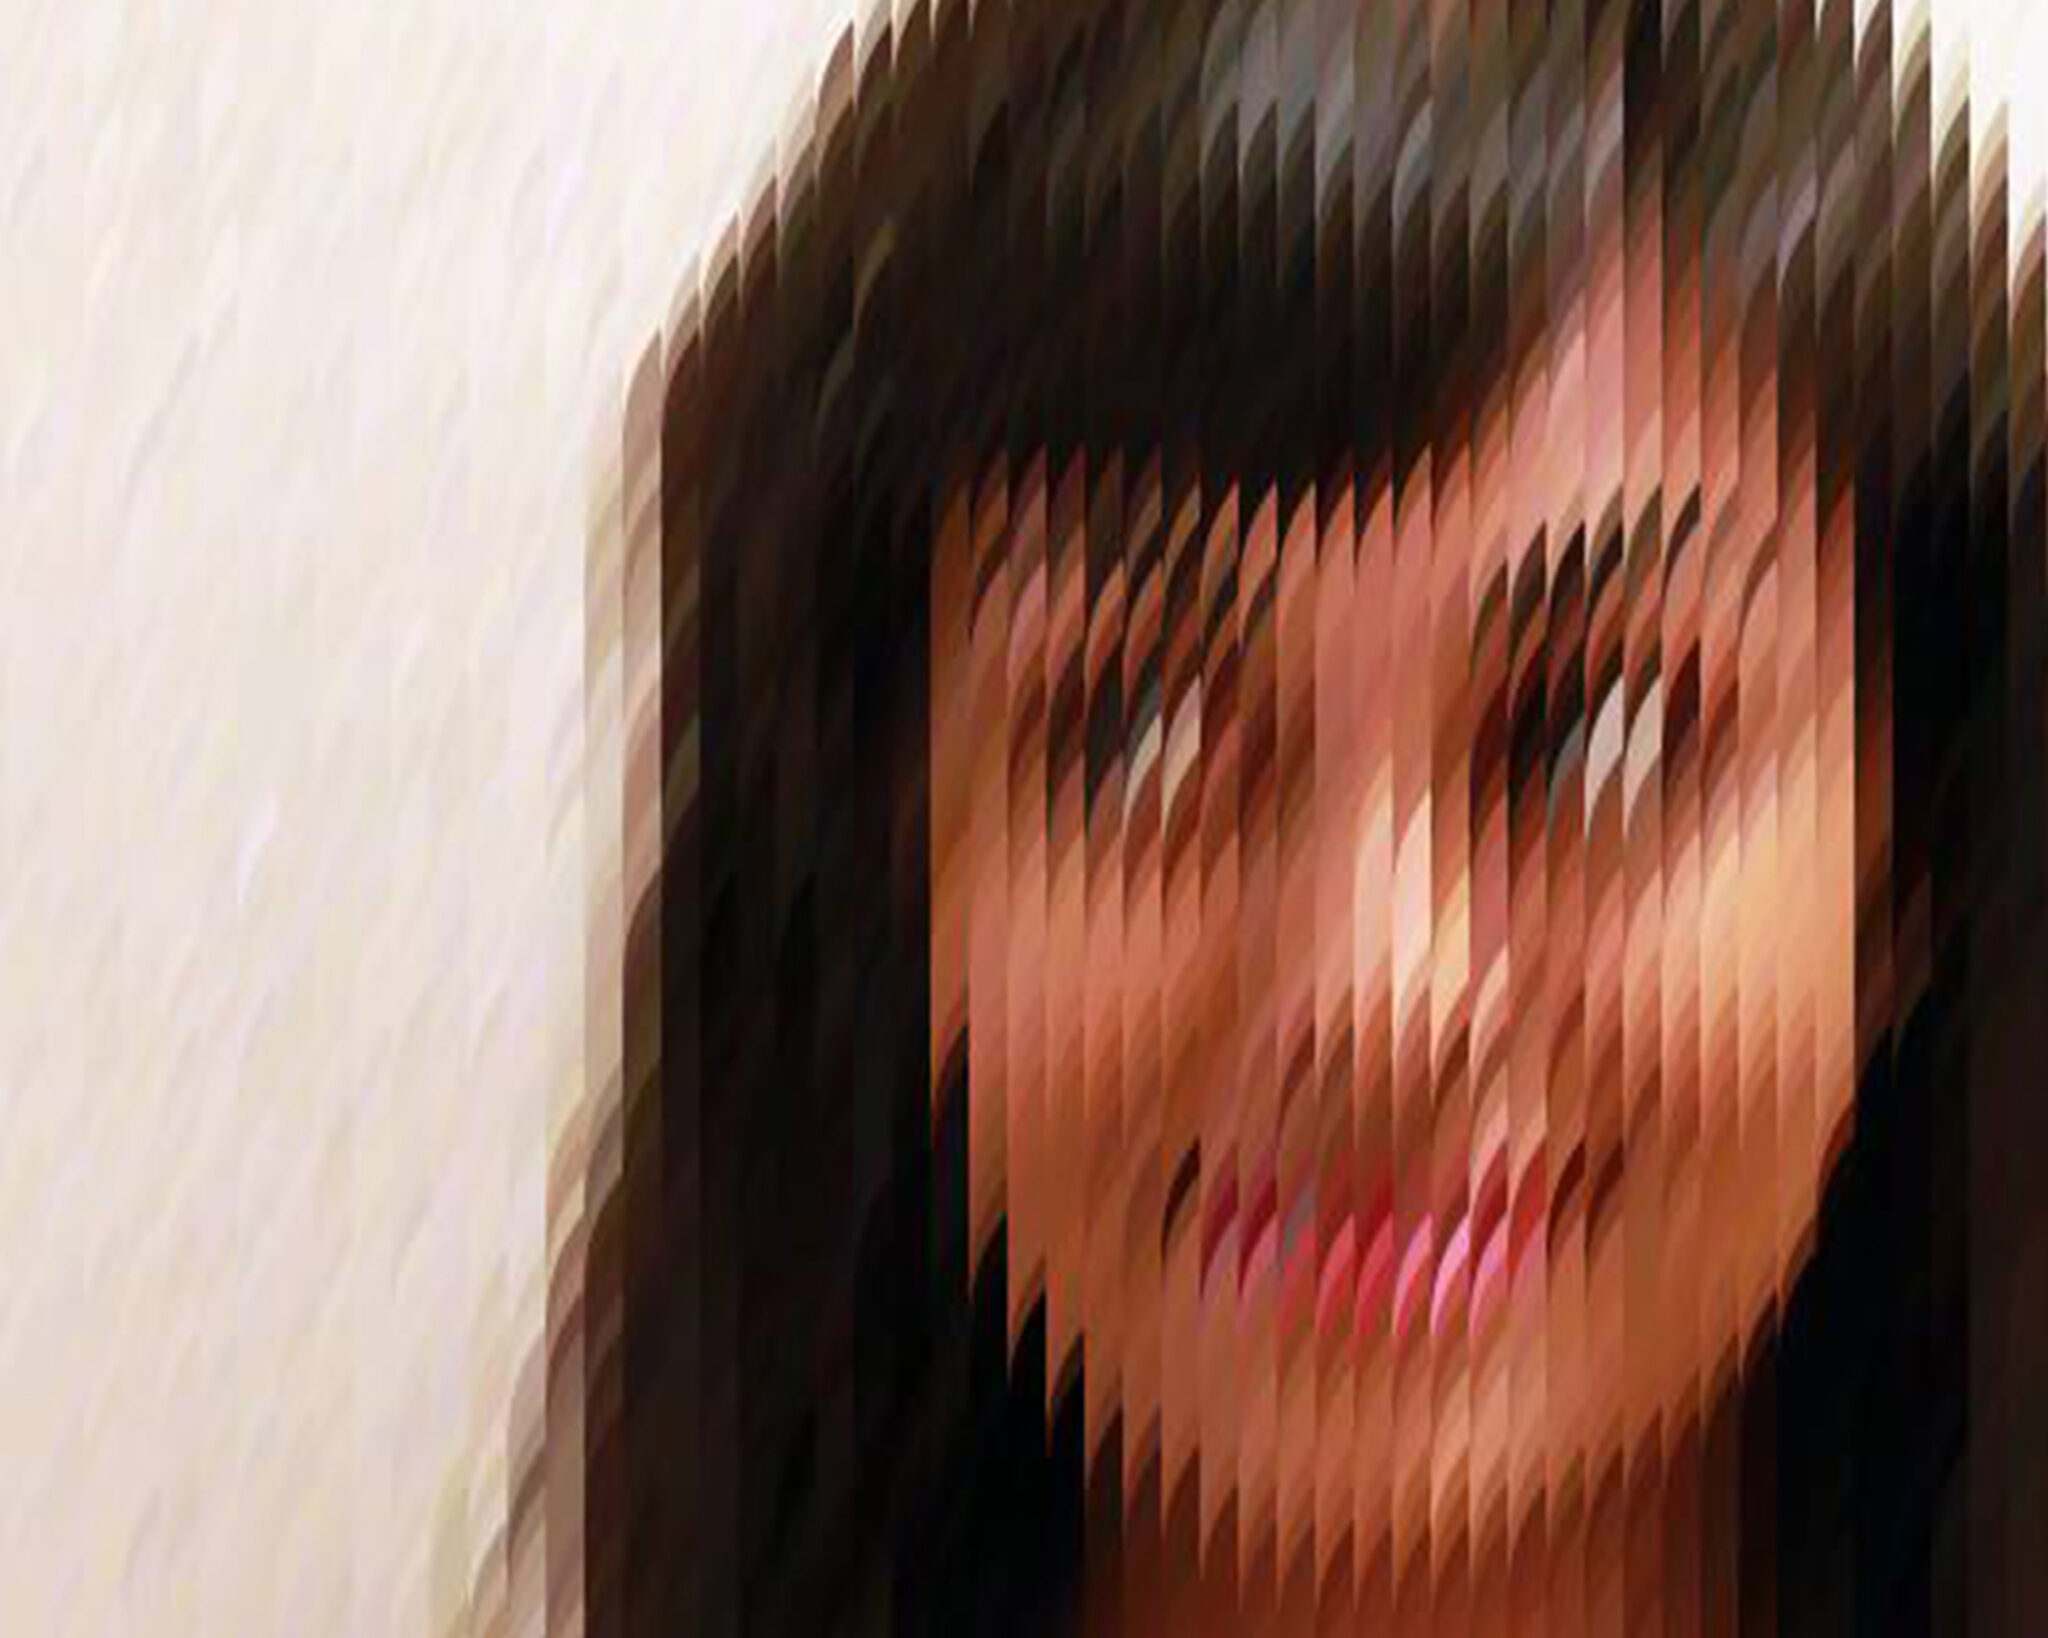 A wavy lines photo effect headshot of Roopa: a medium-toned person with long black hair and bangs, against a white background.